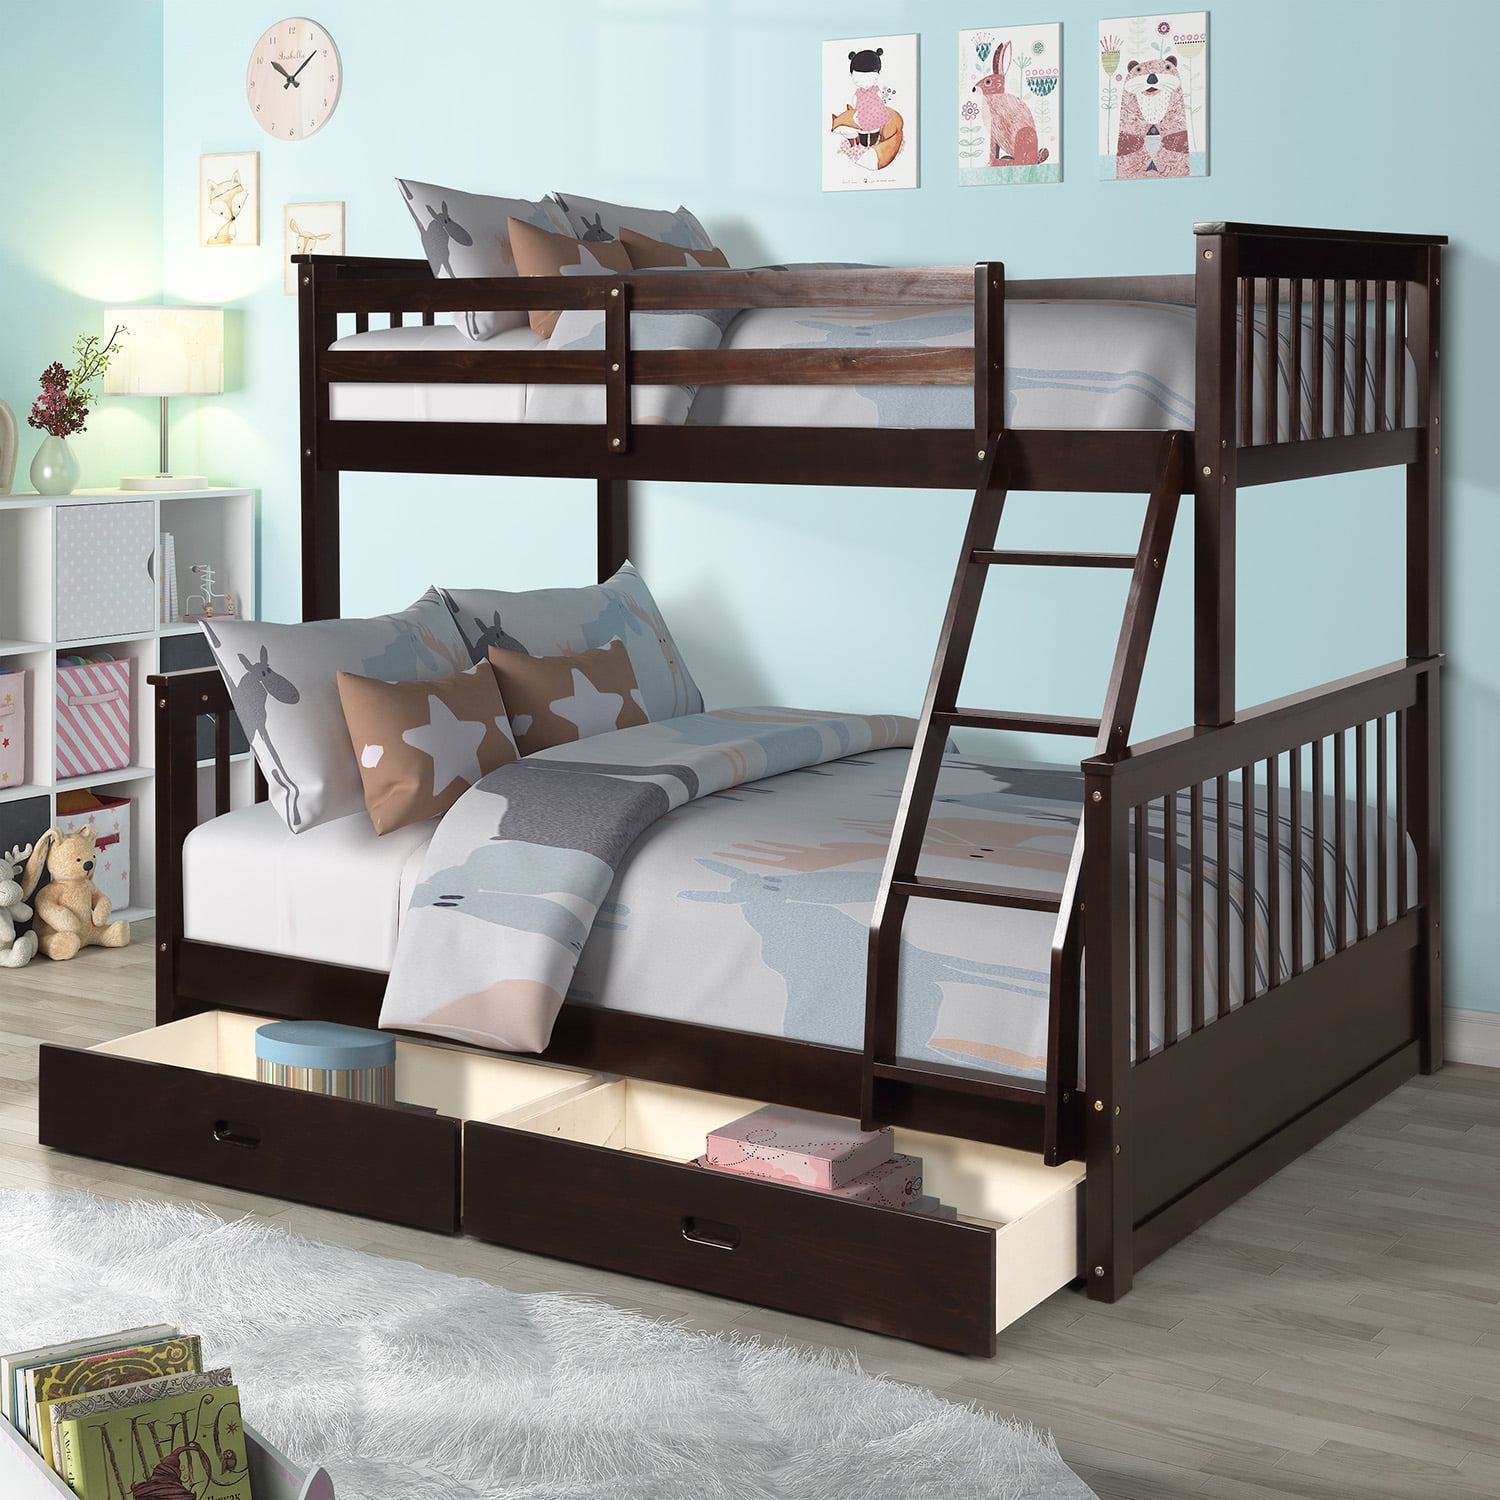 Kids Bunk Beds For Boys Girls Twin, Ameriwood Twin Over Full Bunk Bed In Black And White